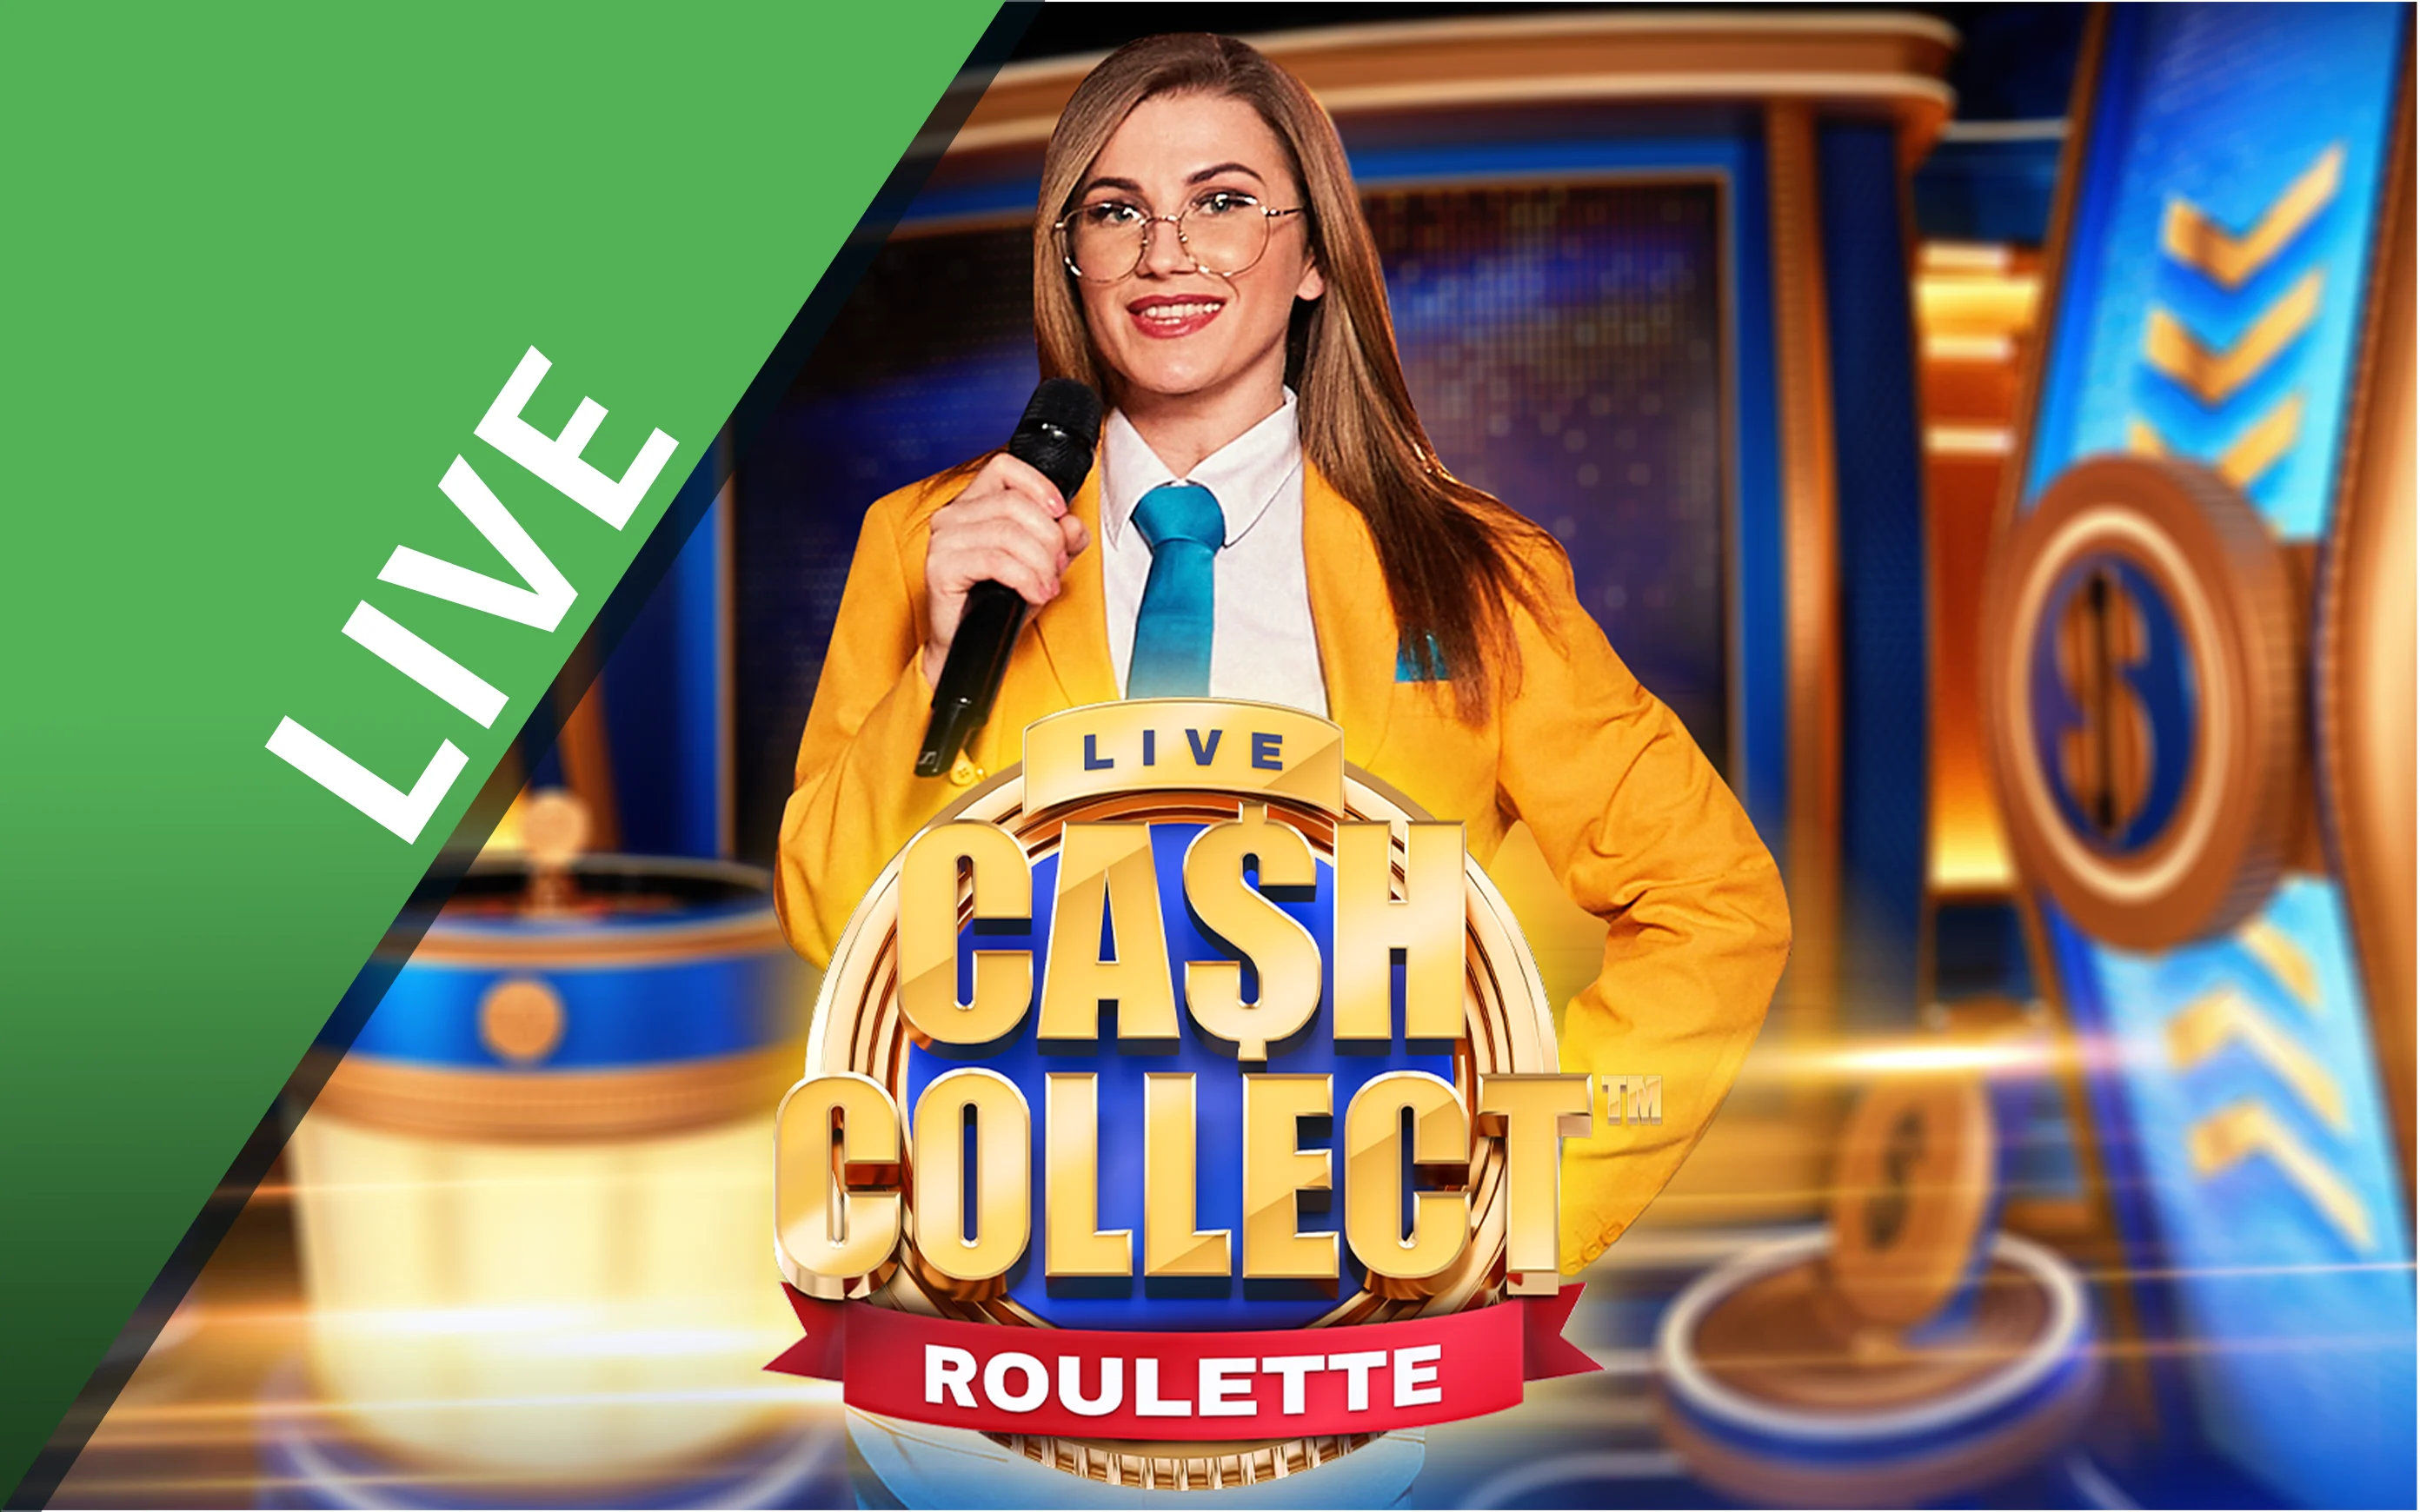 Speel Cash Collect Roulette Live op Starcasino.be online casino